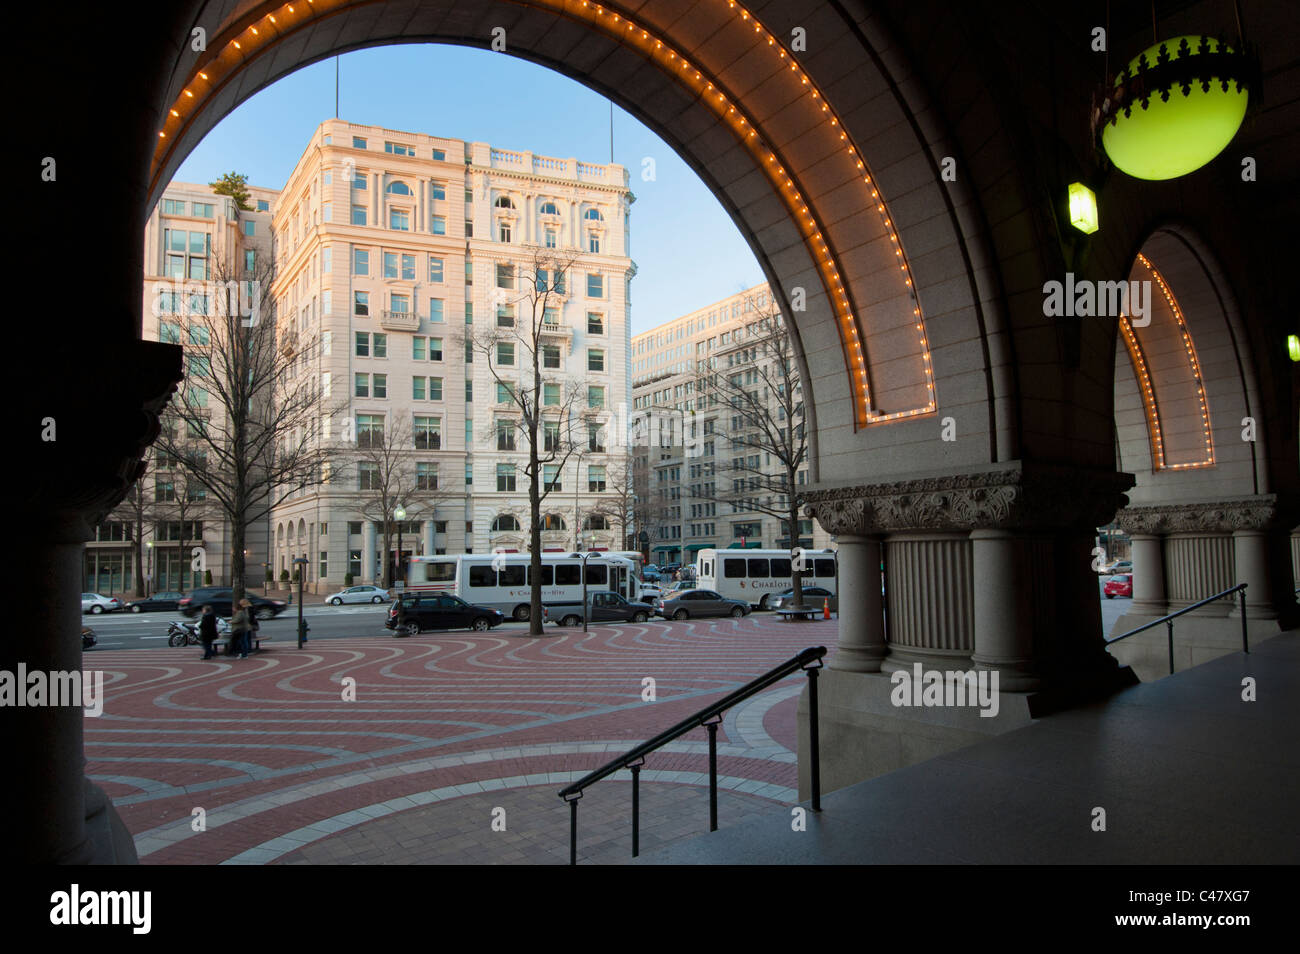 Looking out through the arced entryway of the Old Post Office Pavilion on Pennsylvania Avenue, Washington DC Stock Photo